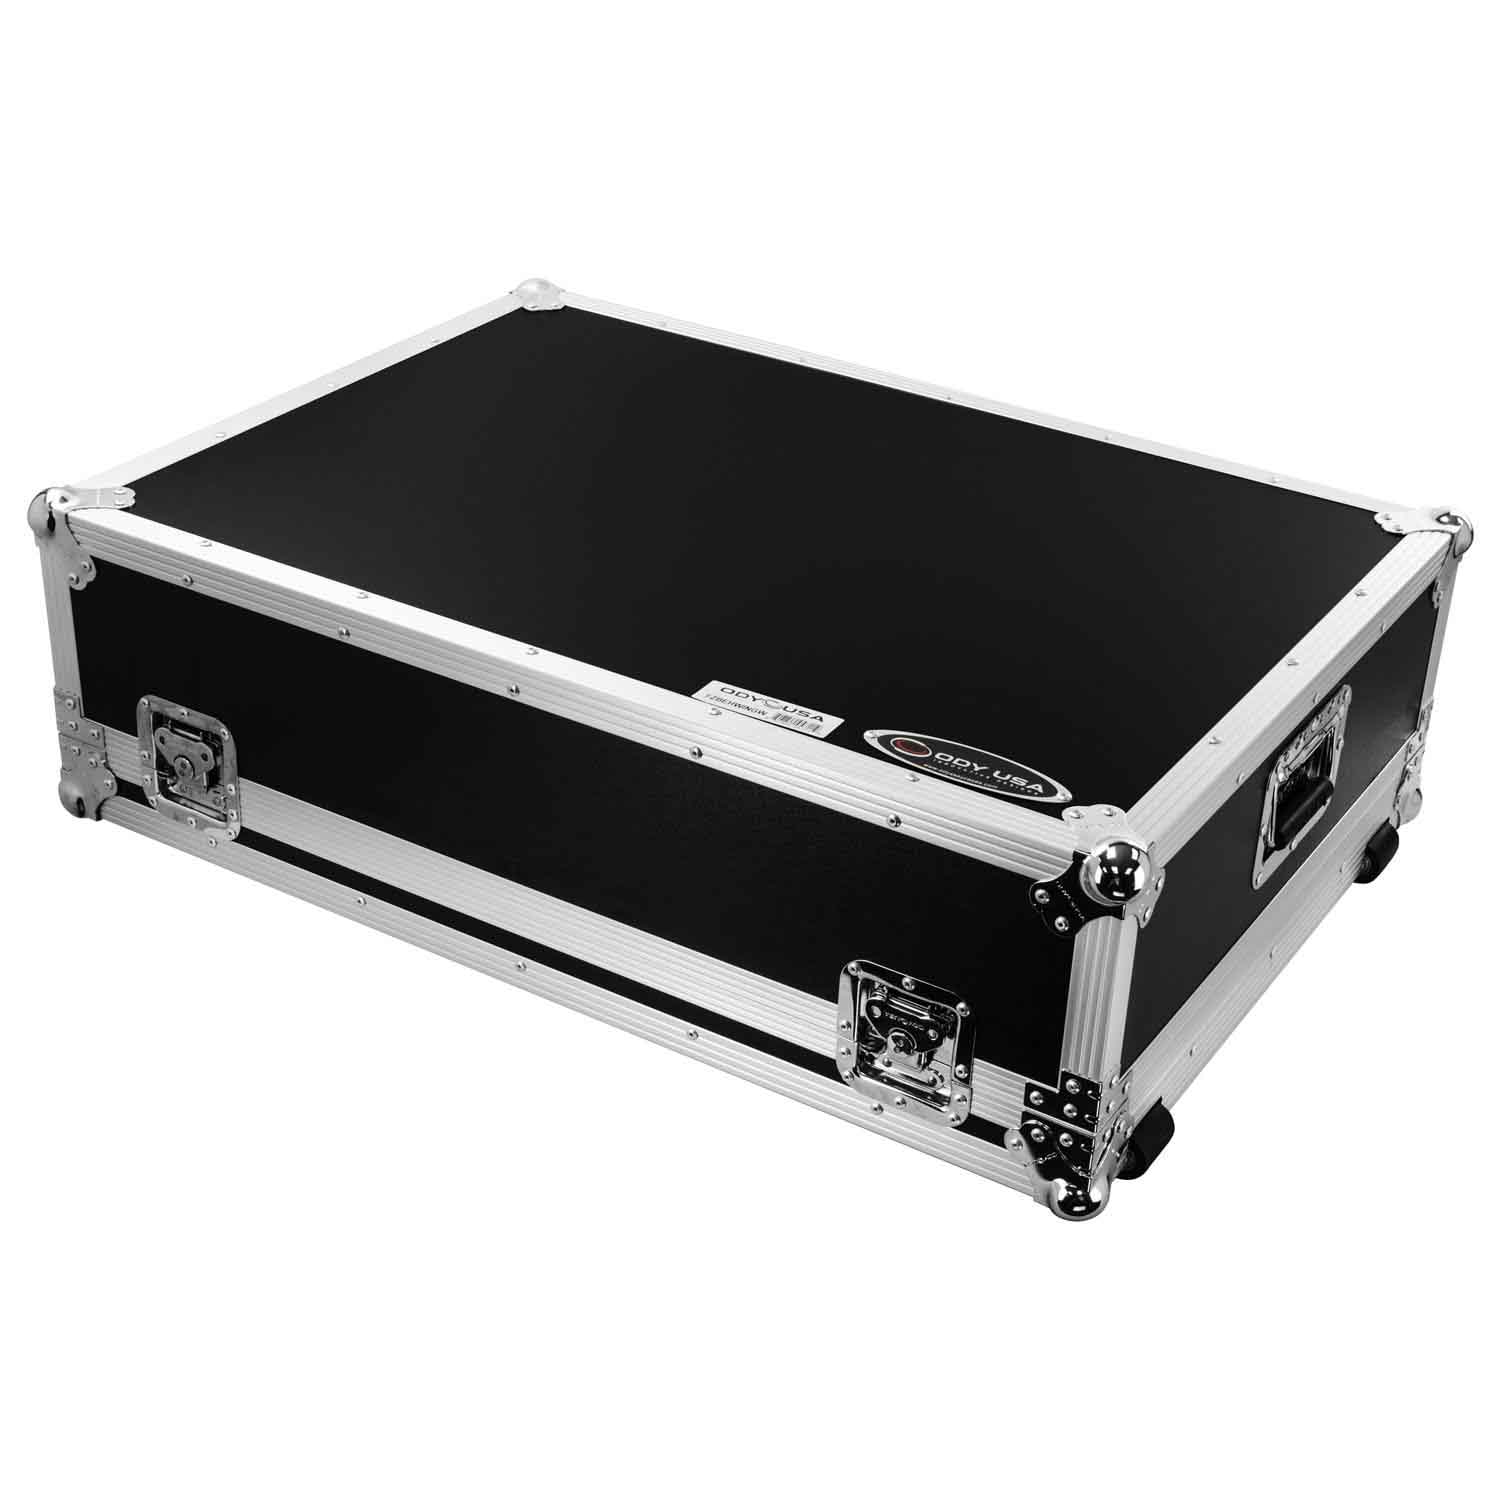 Odyssey FZBEHWINGW ATA Flight Case for Behringer Wing with Wheels Odyssey